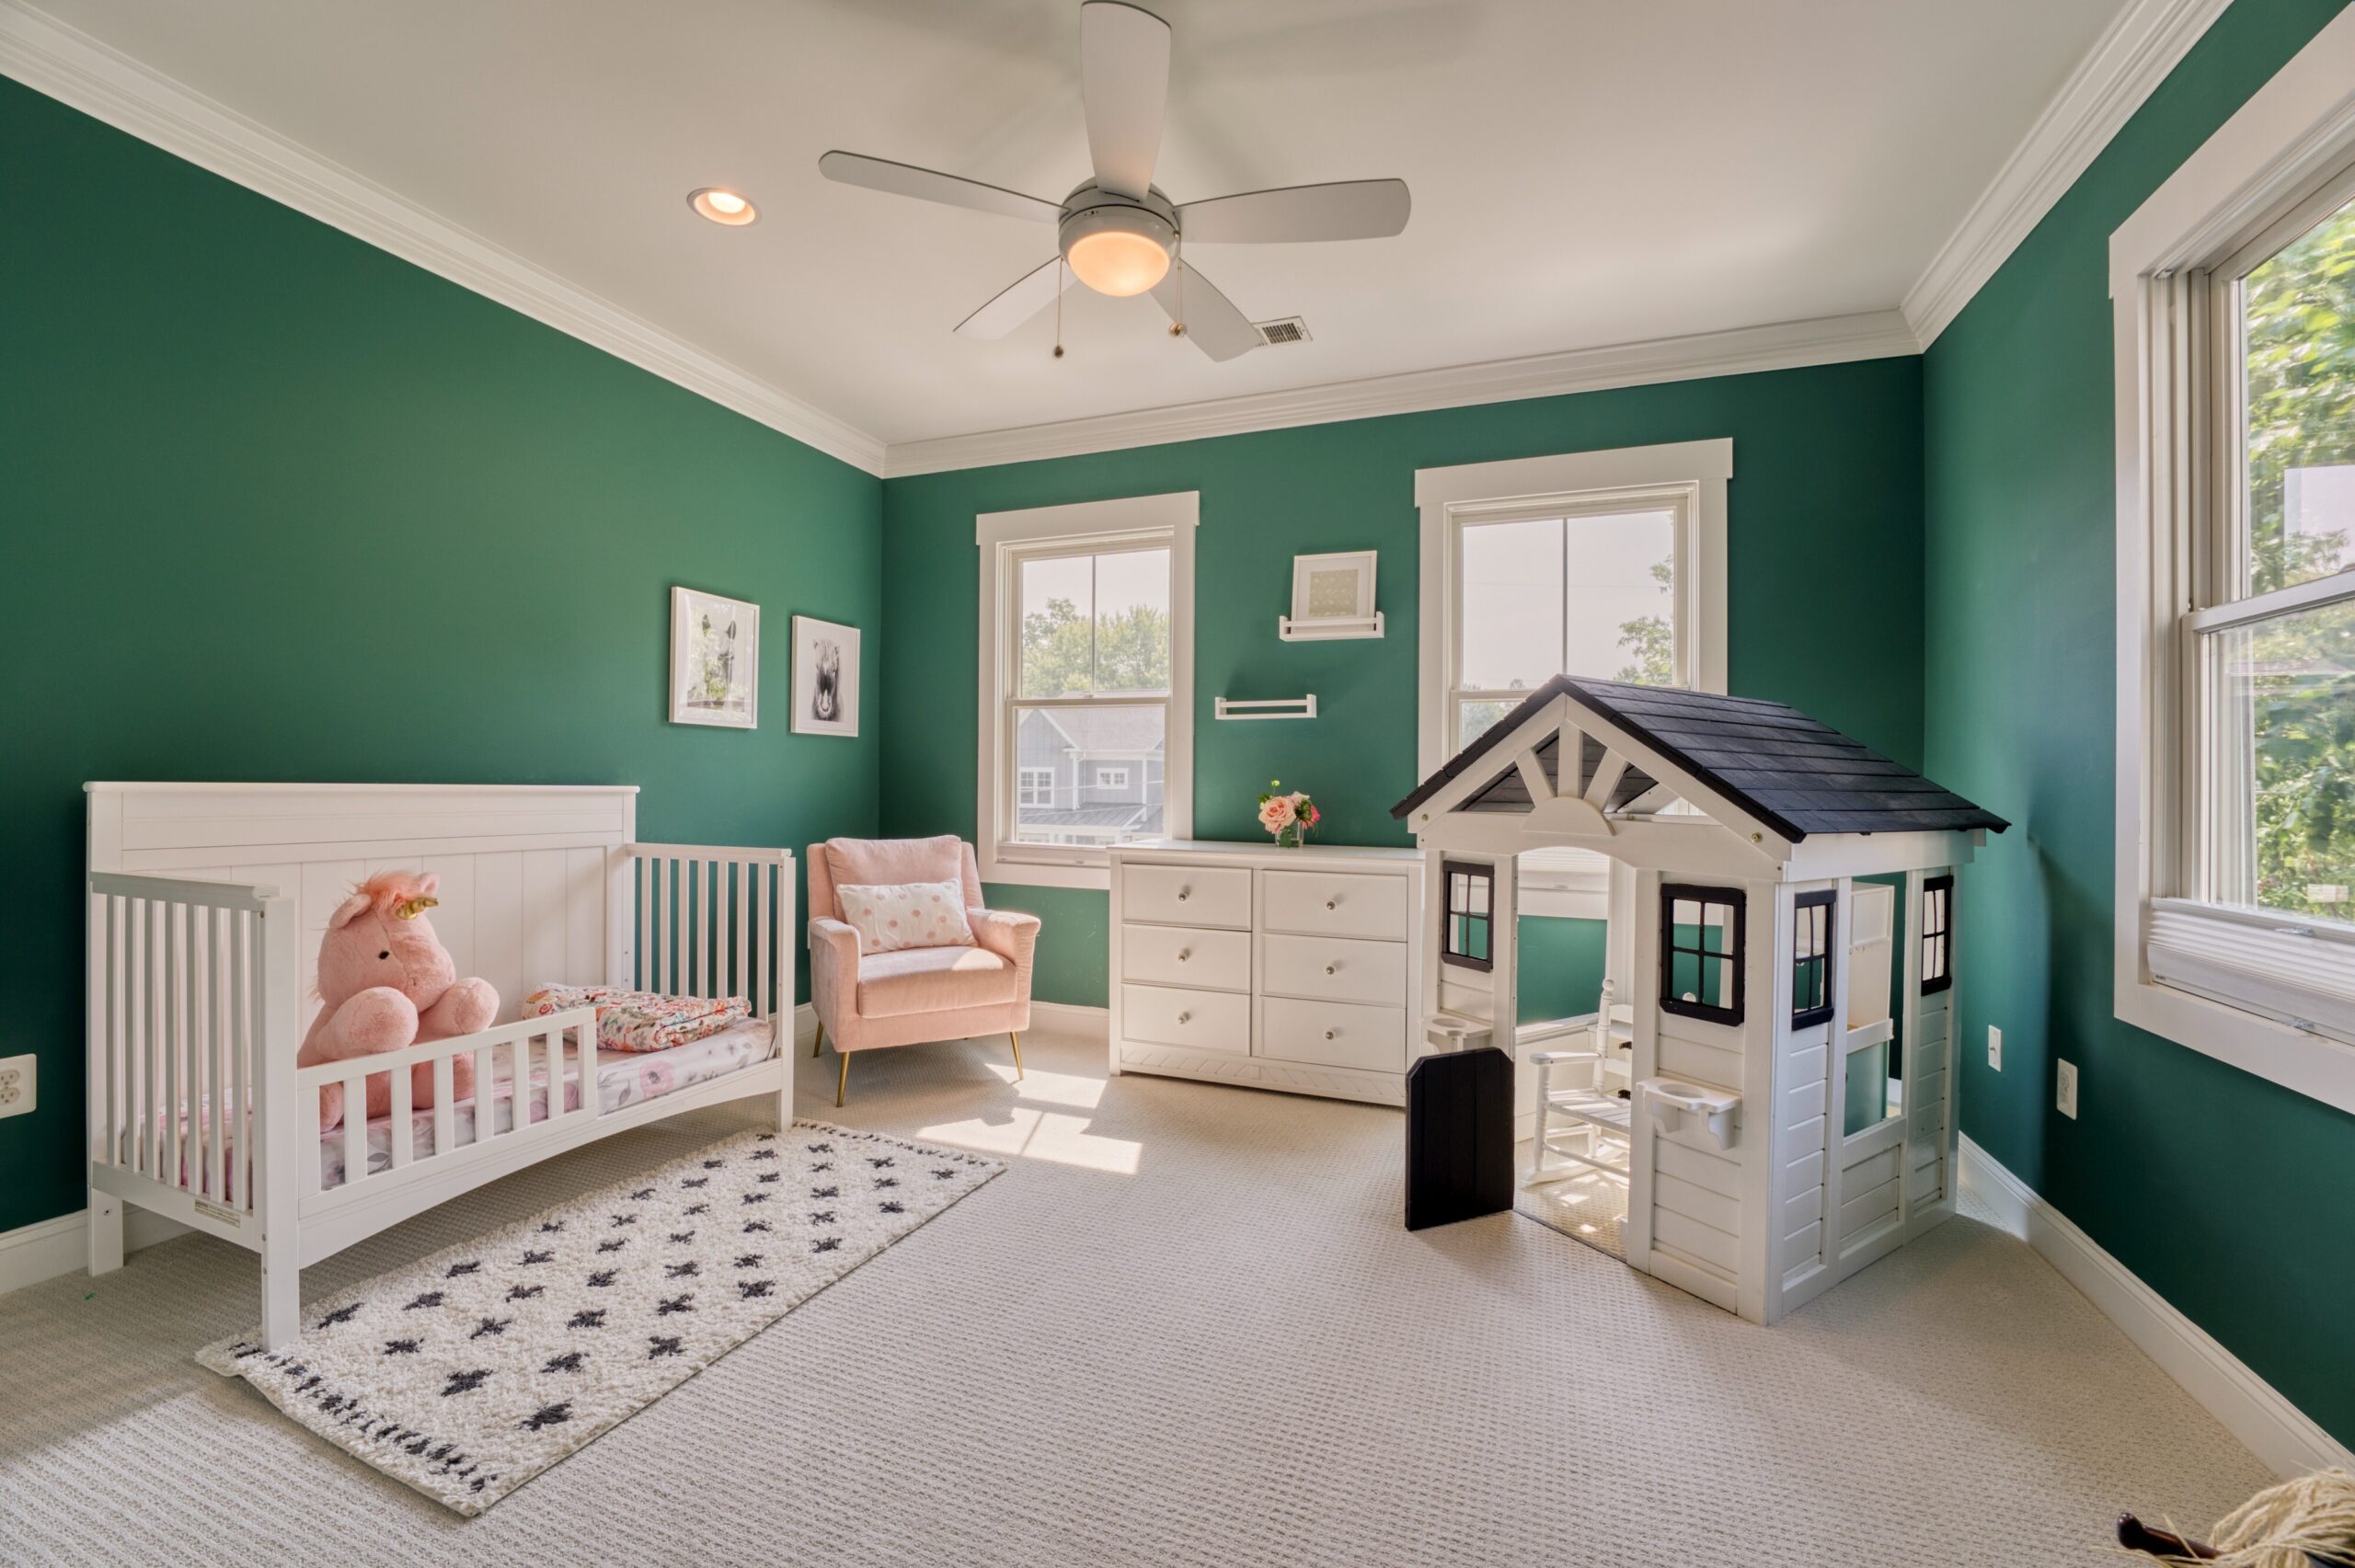 Professional interior photo of 505 N West St - showing one of the secondary bedrooms with jungle green walls and child's furniture